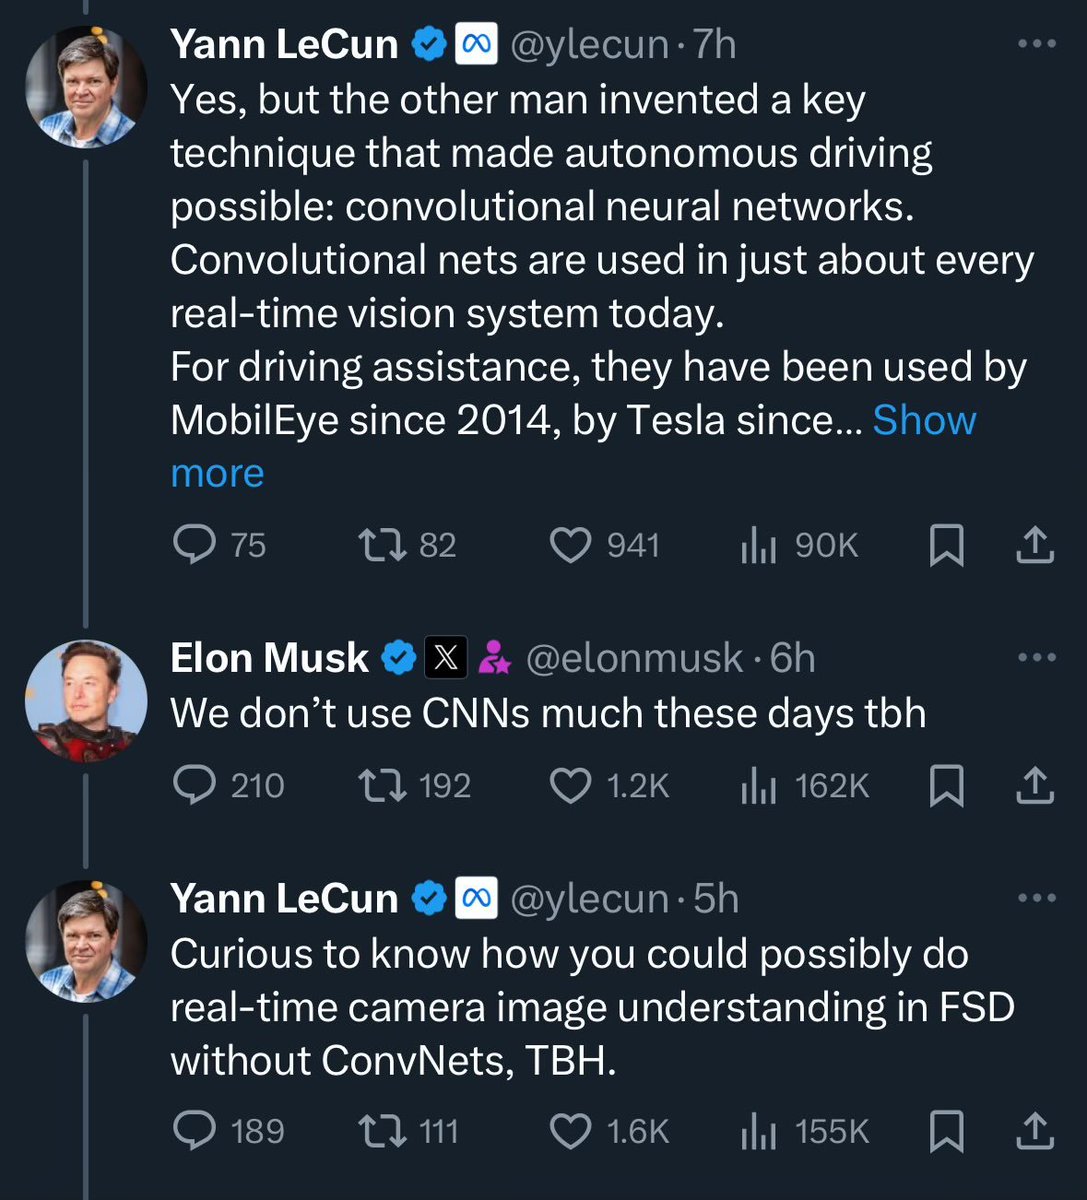 Condolences to the Tesla FSD team who have to ship a version without CNNs by next week